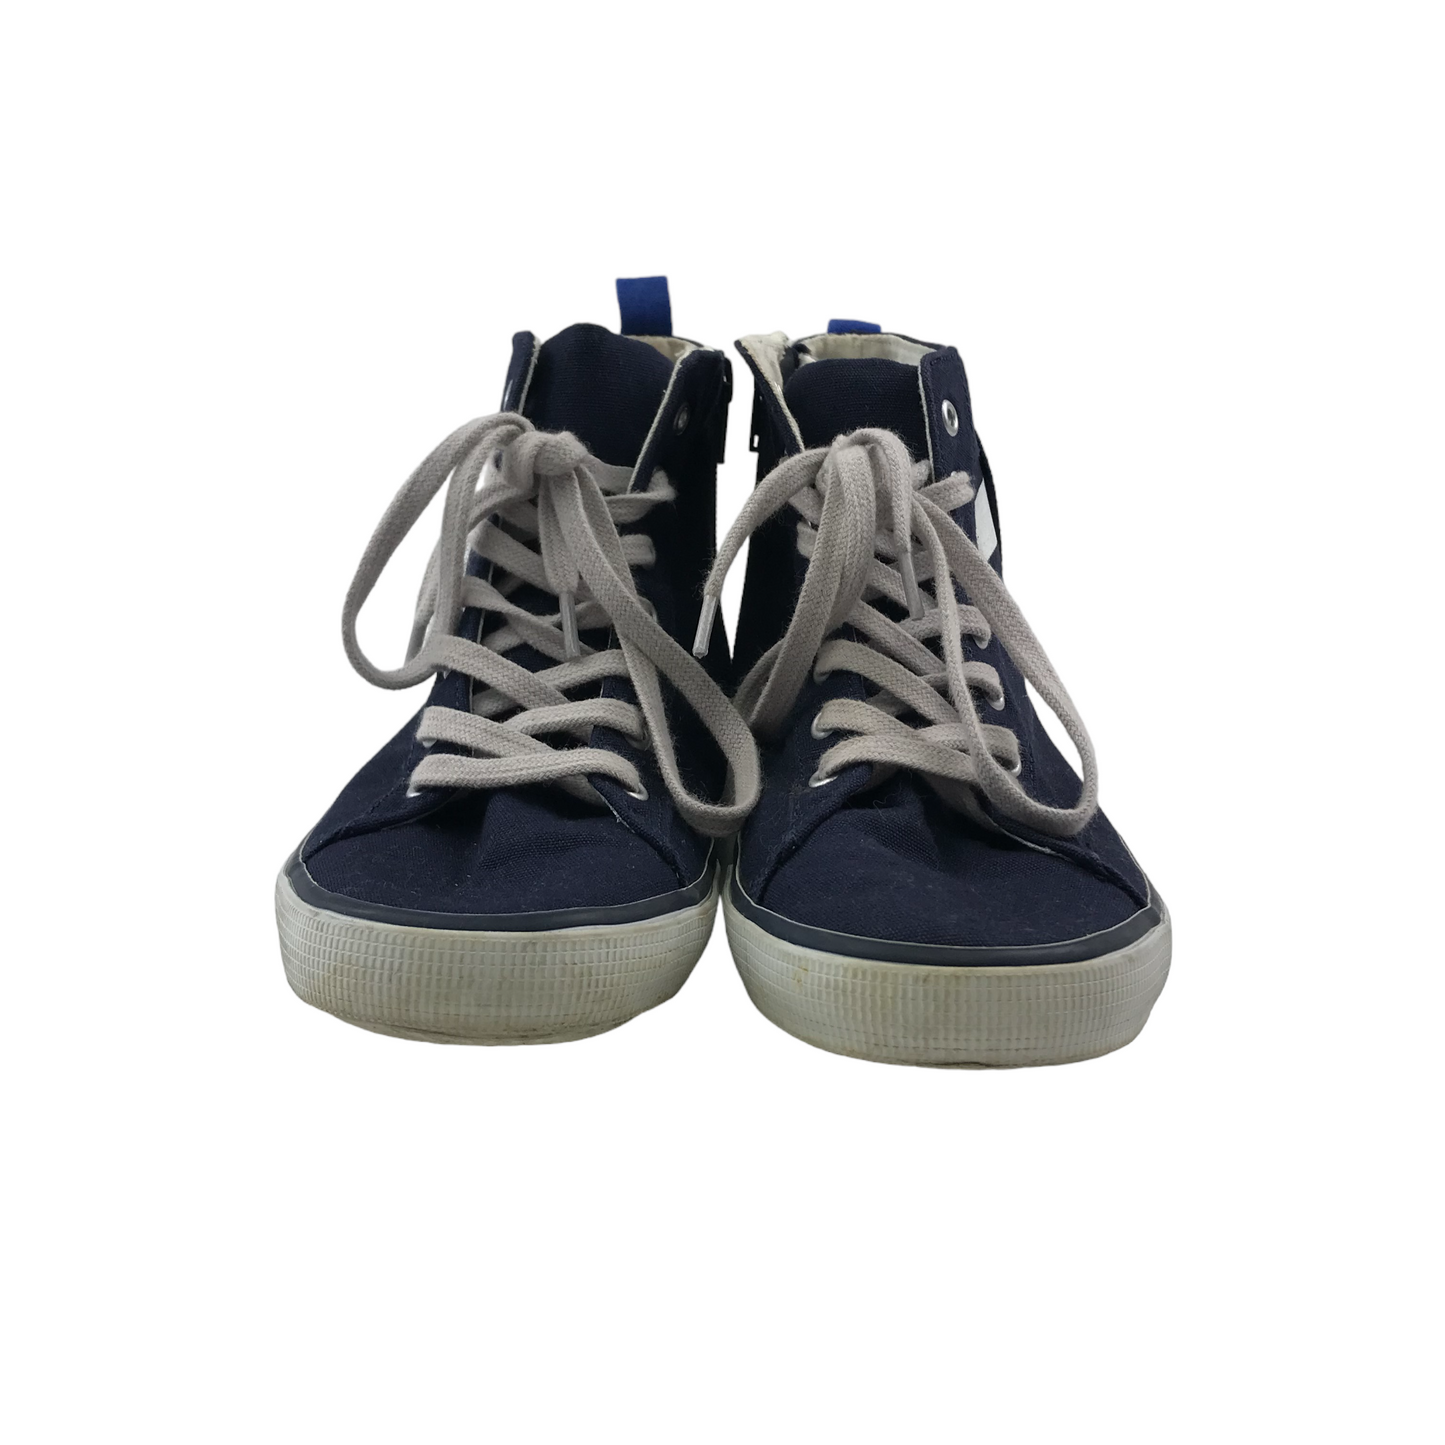 GAP Star Wars Trainers Shoe Size 3 Navy High Tops Trainers